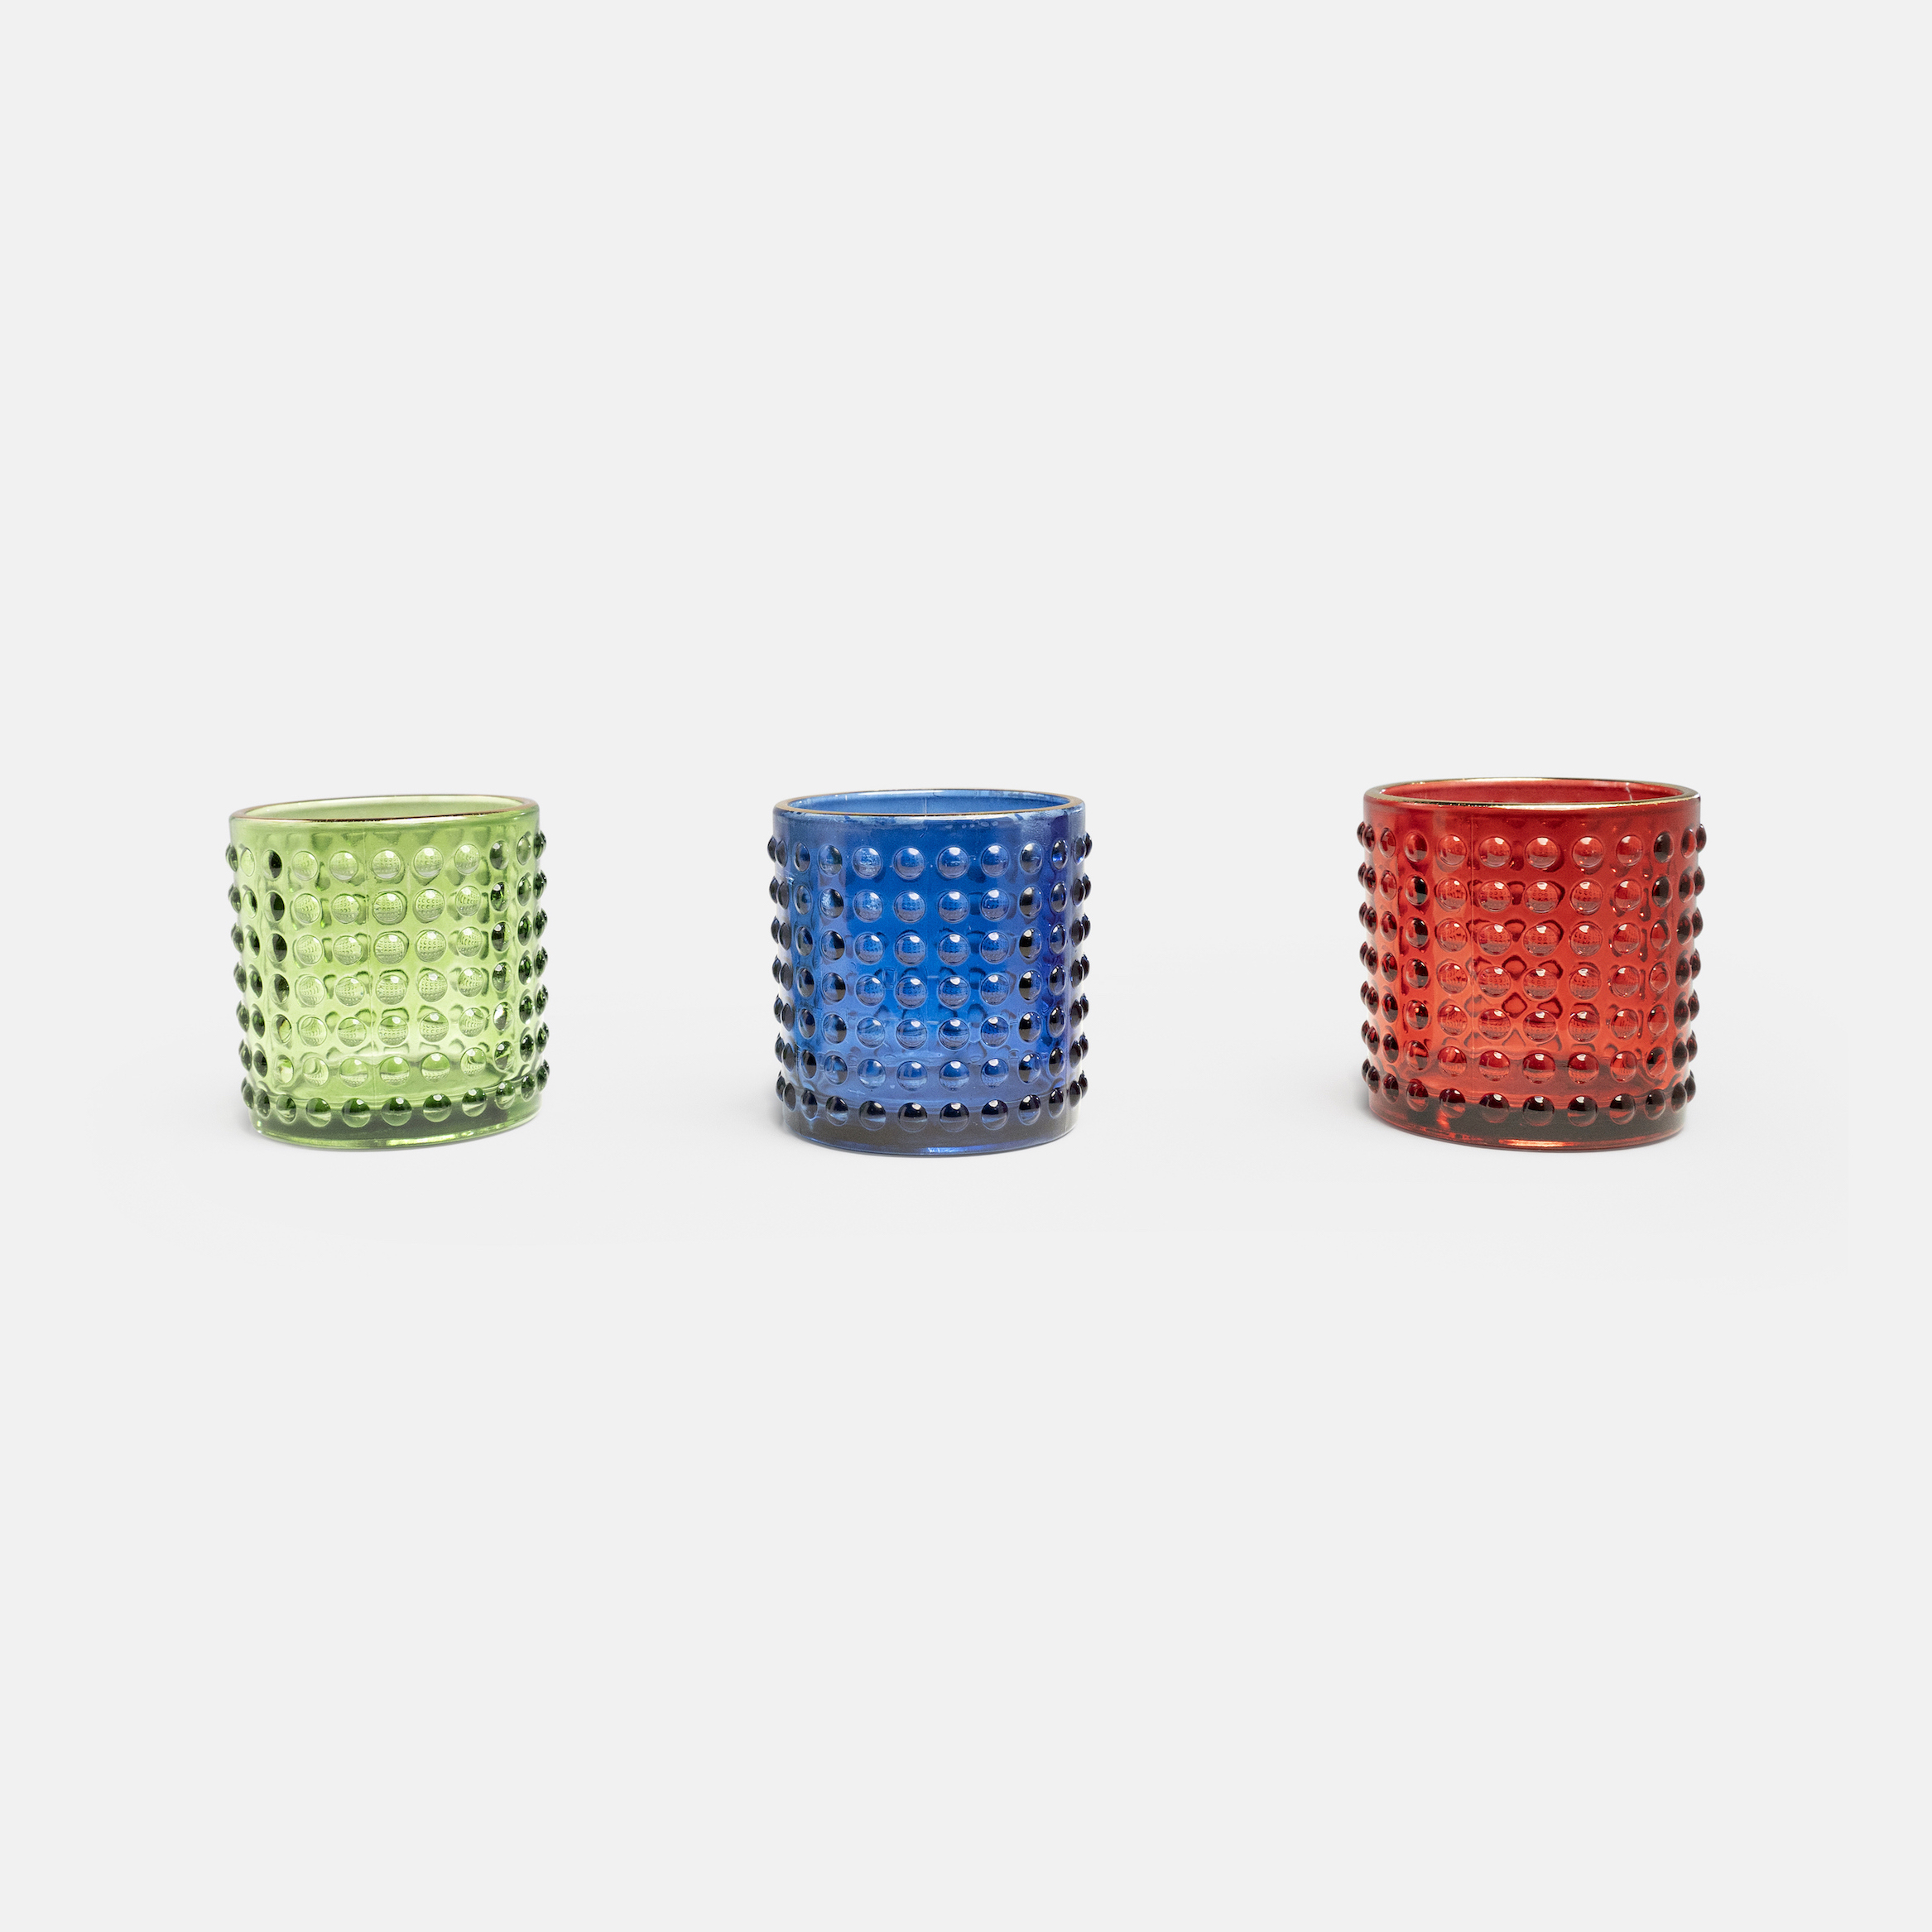 8. BUBBLES Tealight Holders (4 Drop down colour options GREEN, BLUE, RED, MIXED)